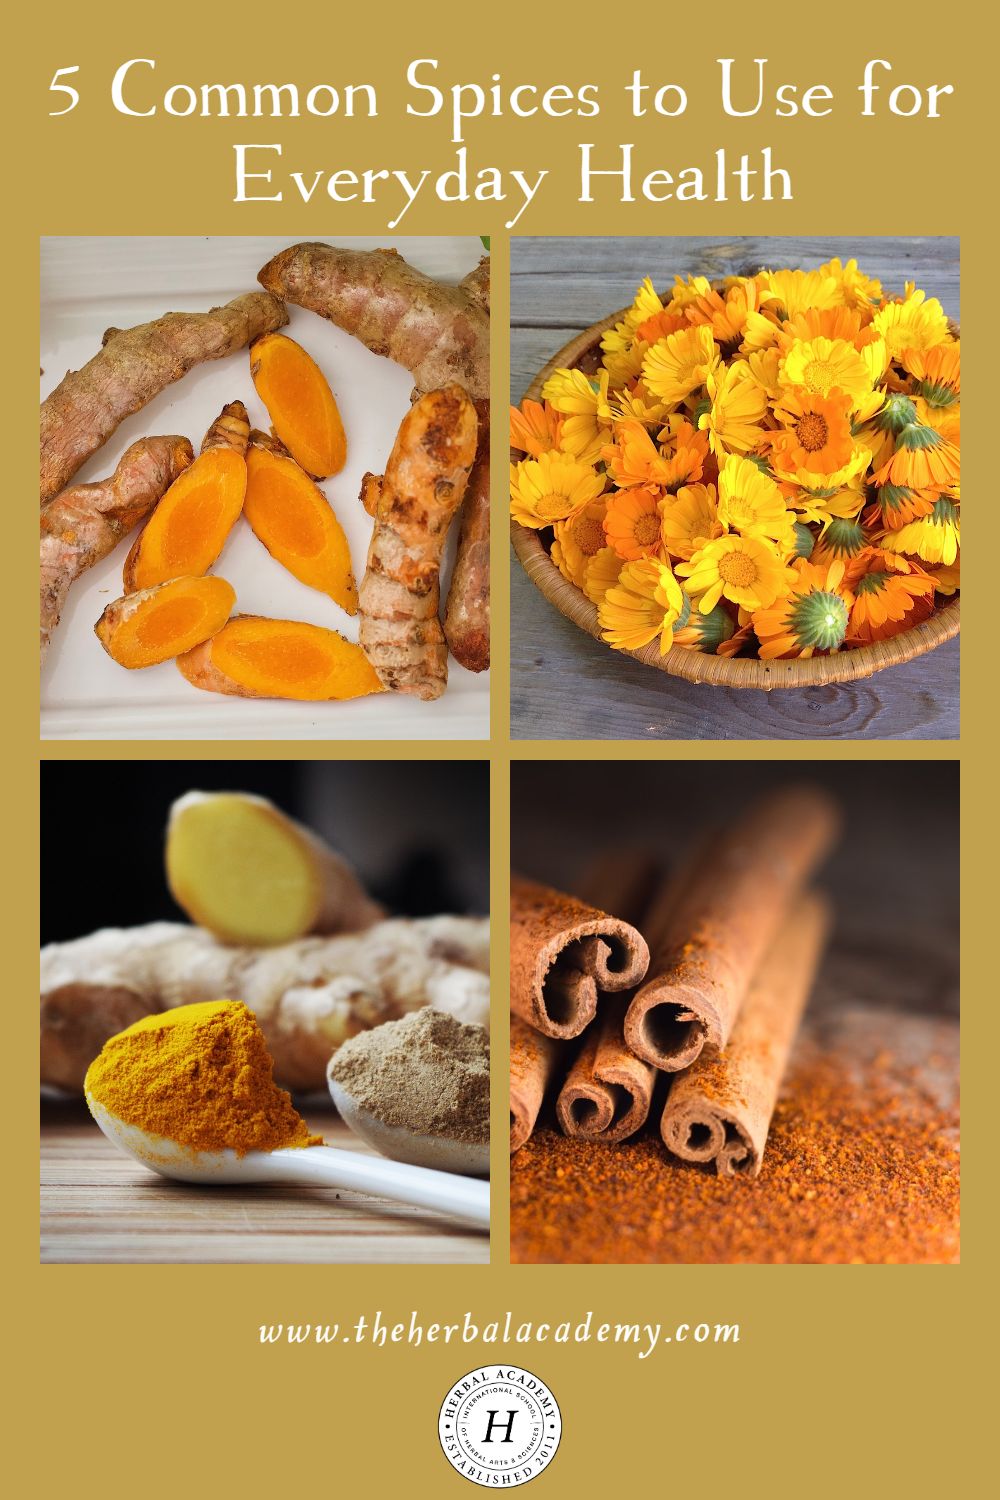 5 Common Spices to Use for Everyday Health | Herbal Academy | Learn about 5 common spices that you can use for everyday health, taken from Bevin Clare's book, Spice Apothecary.